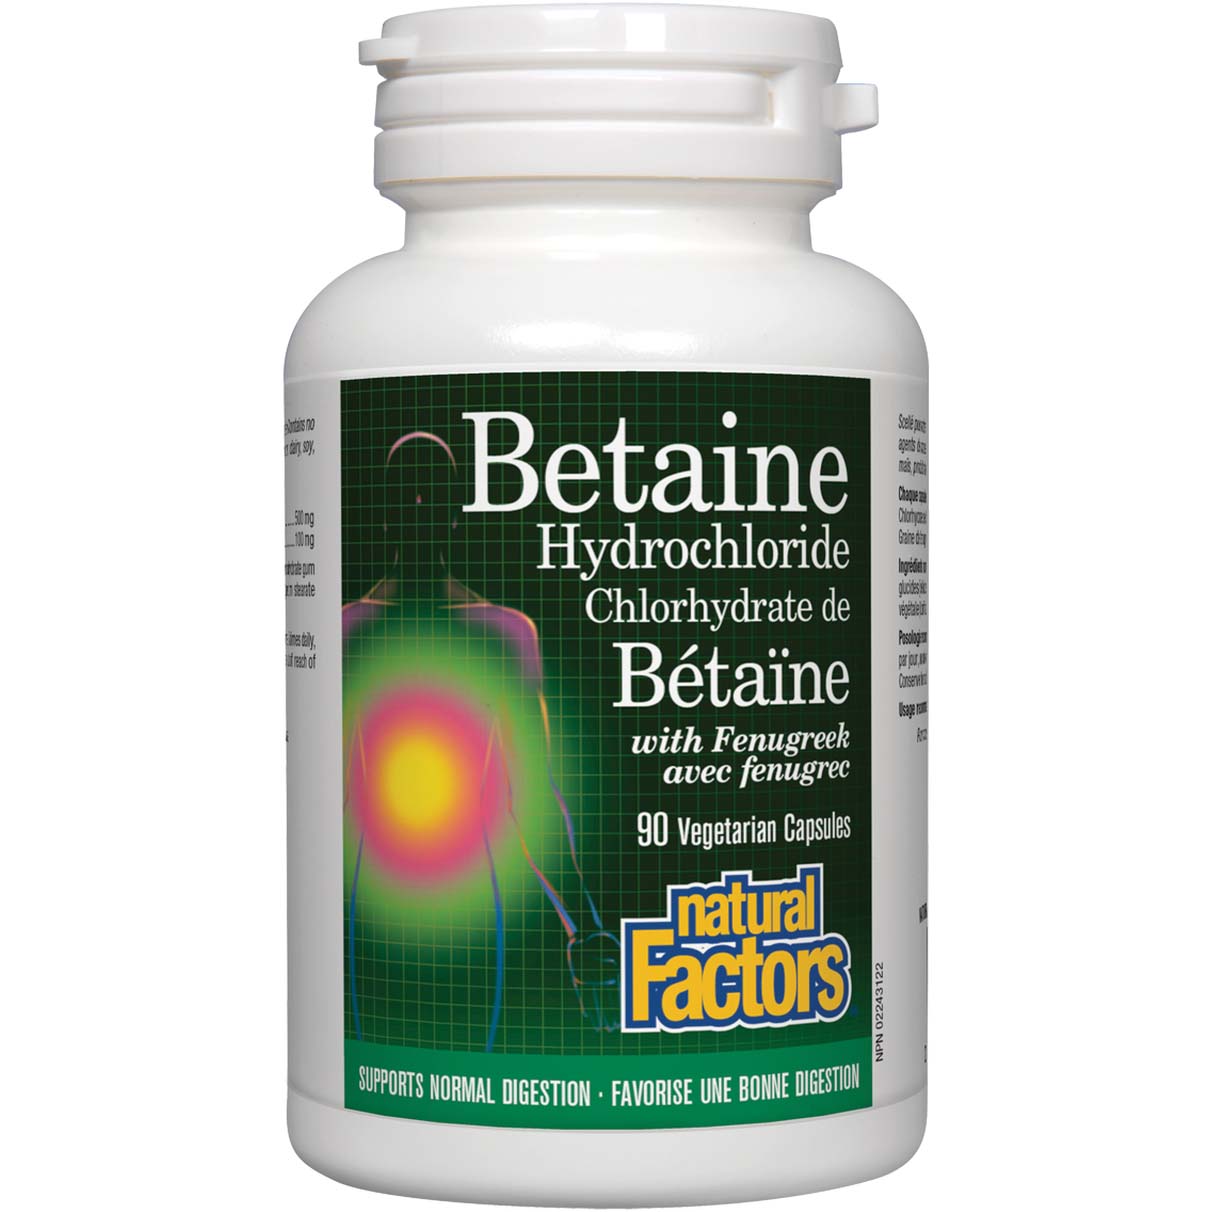 Natural Factors Betaine Hydrochloride With Fenugreek 90 Veggie Capsules